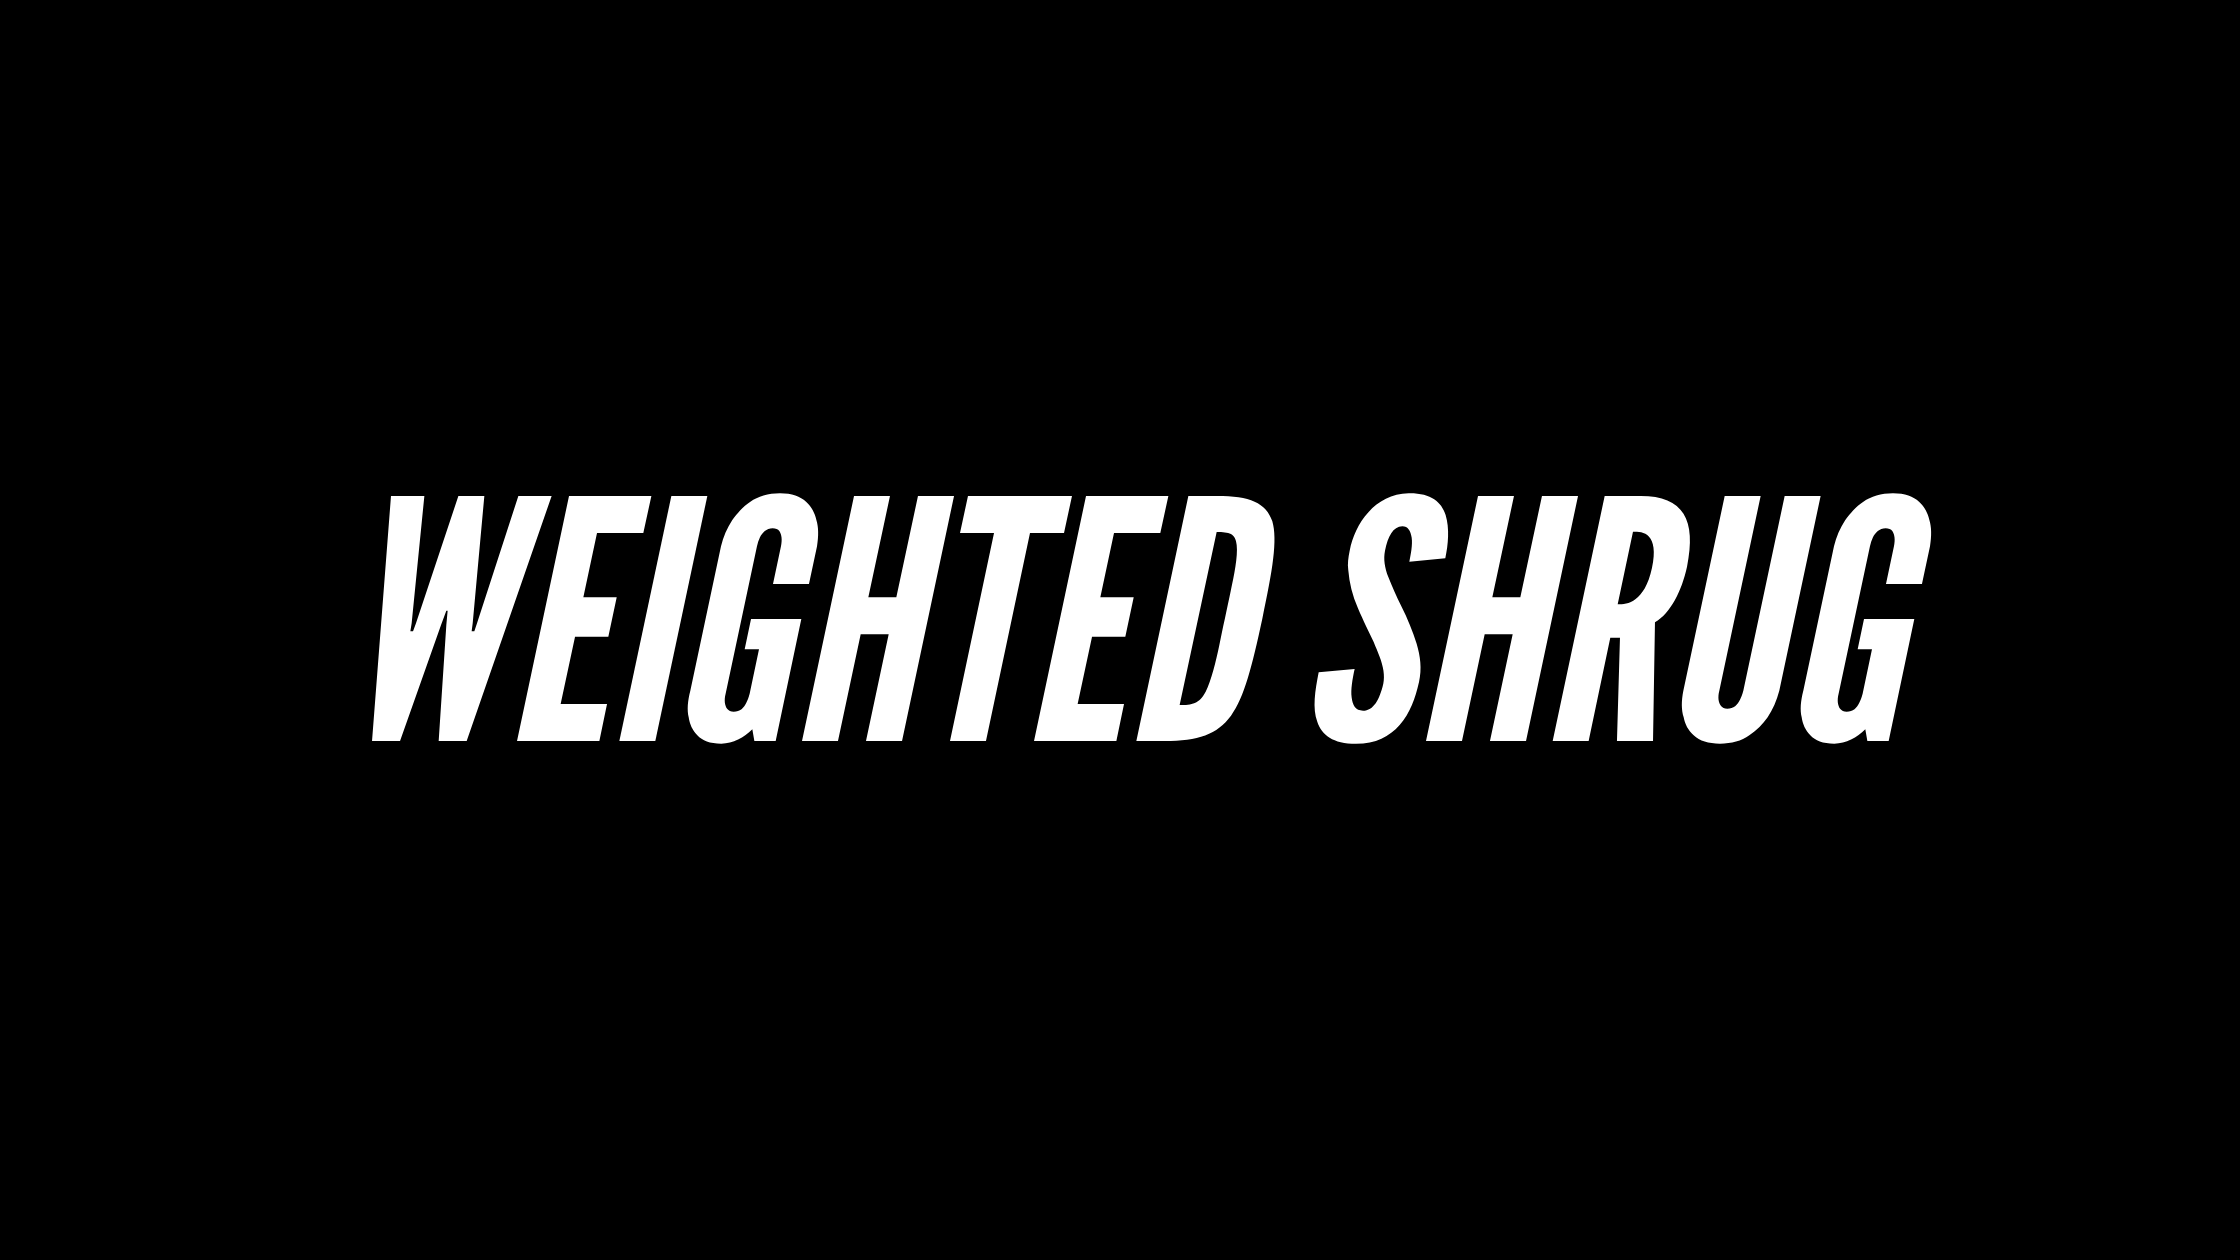 weighted-shrug